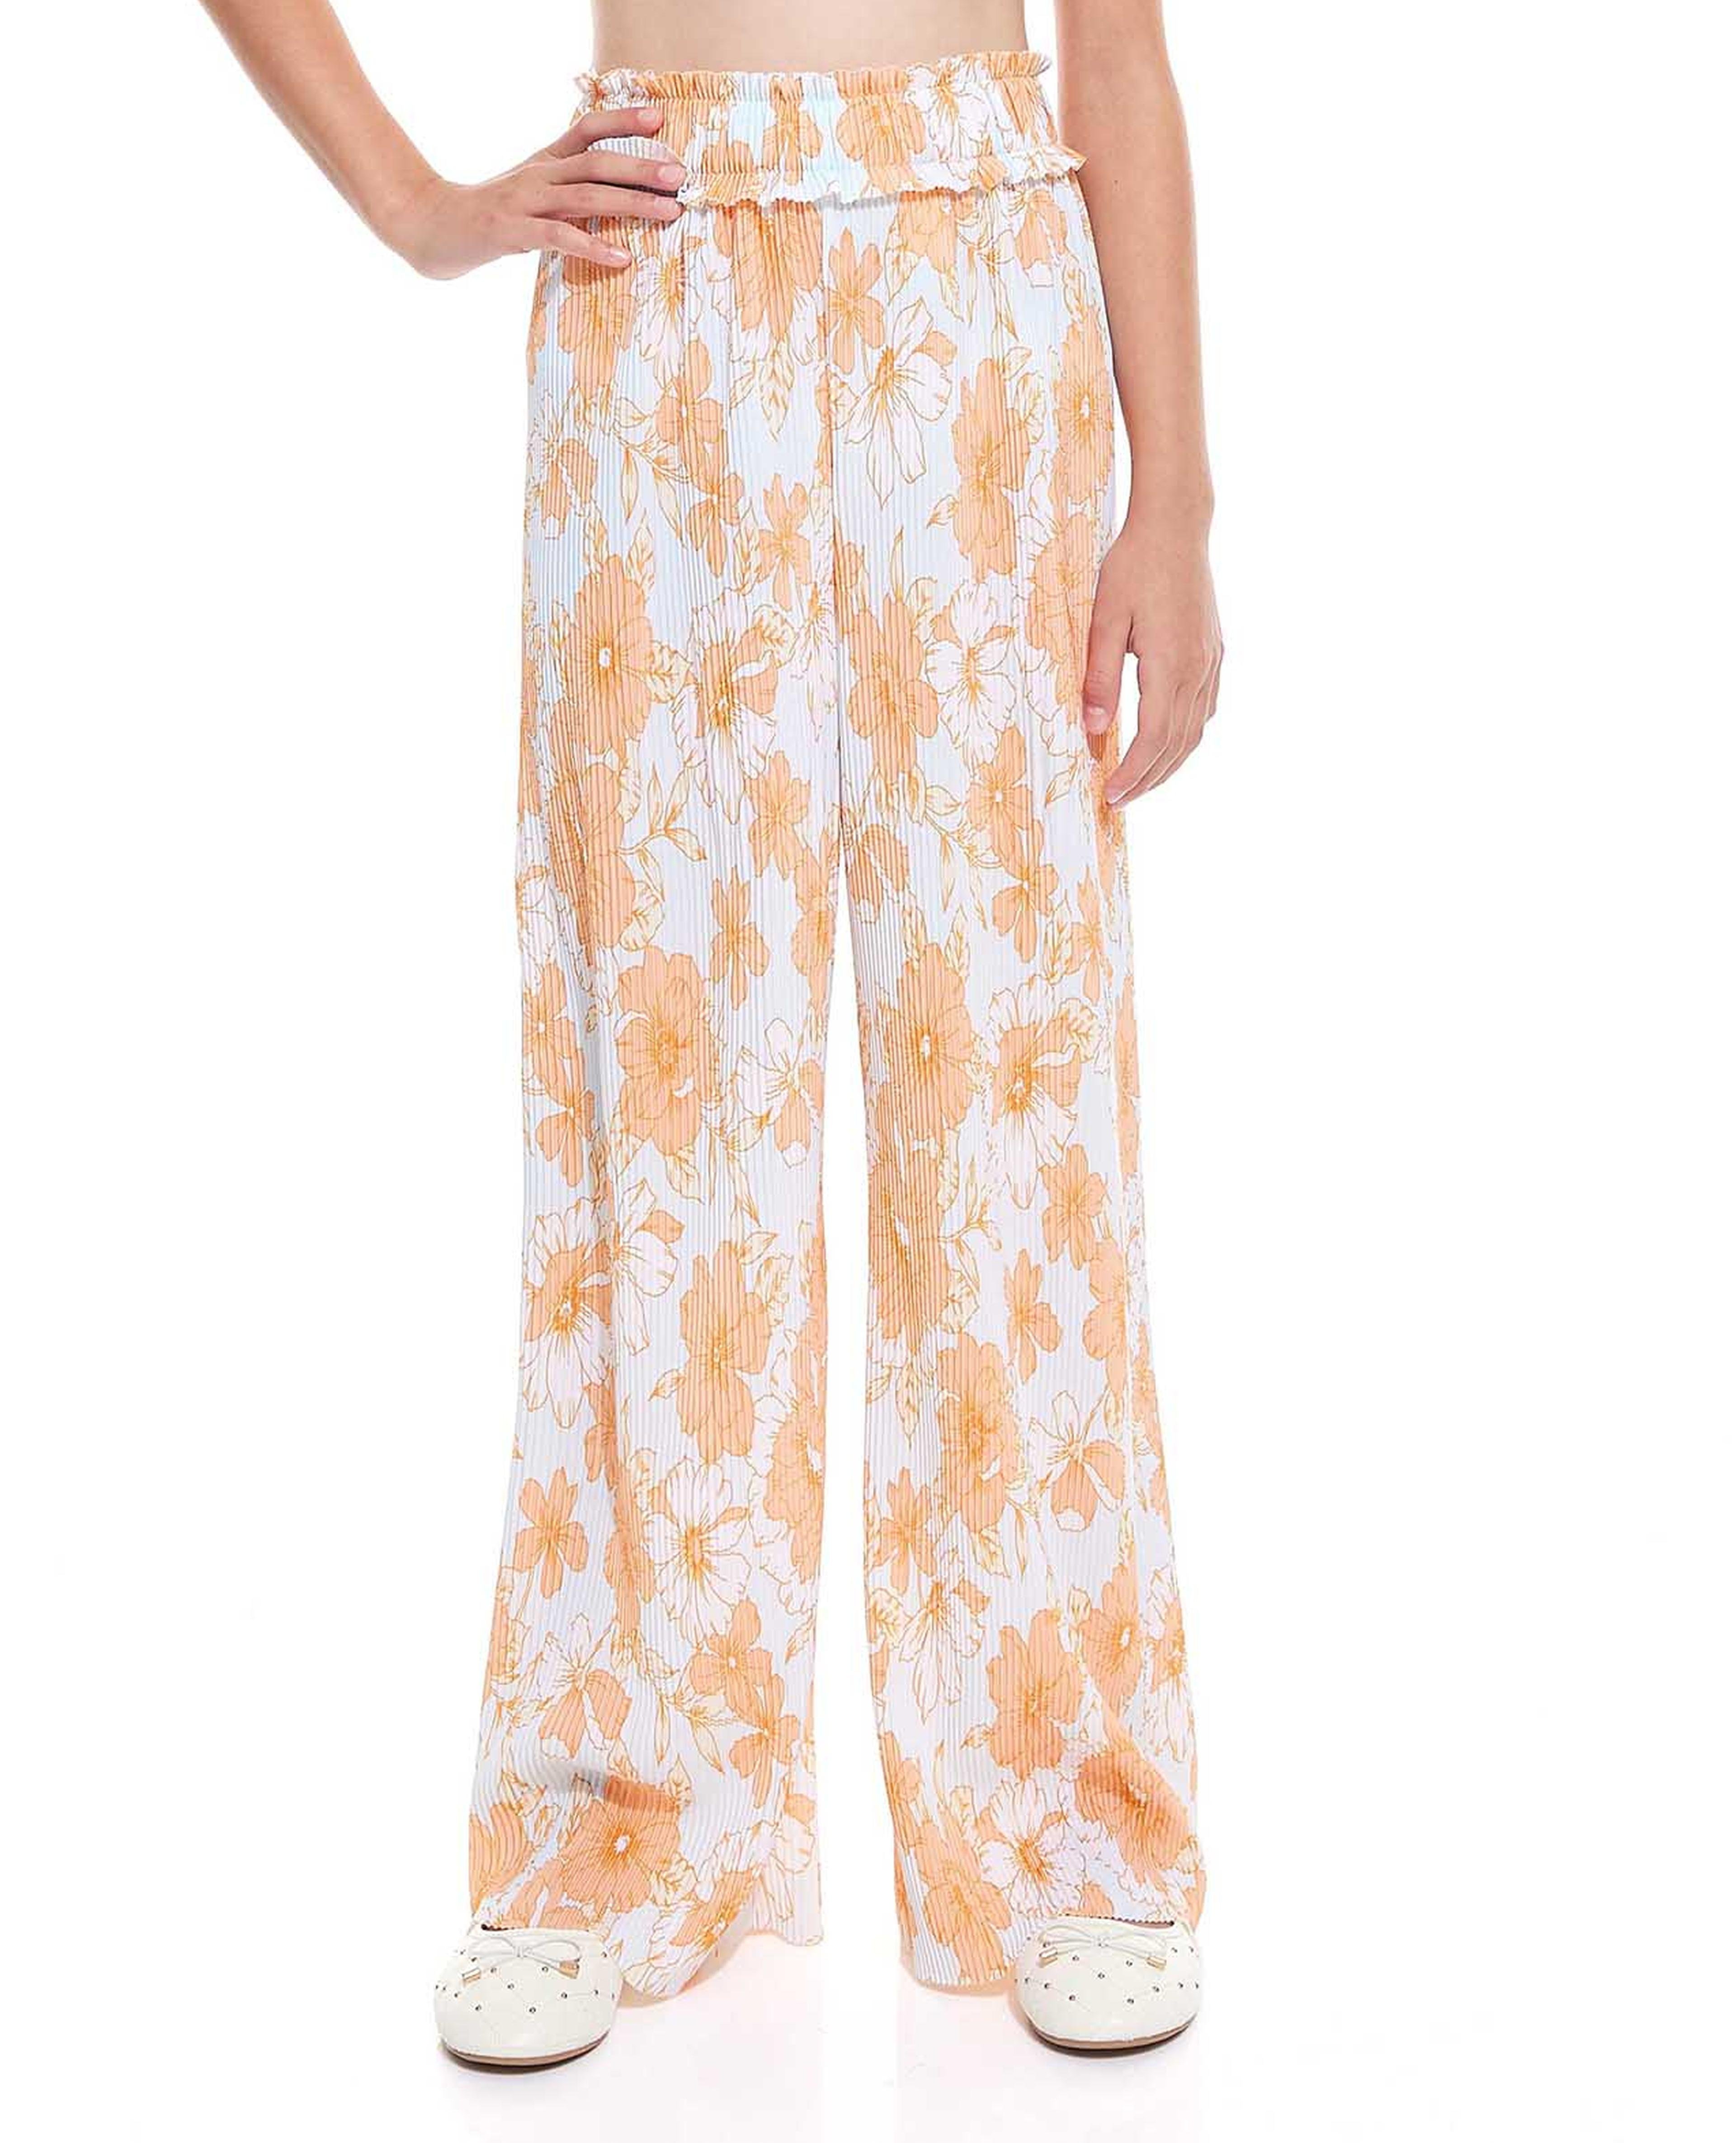 Floral Print Pant with Elastic Waist